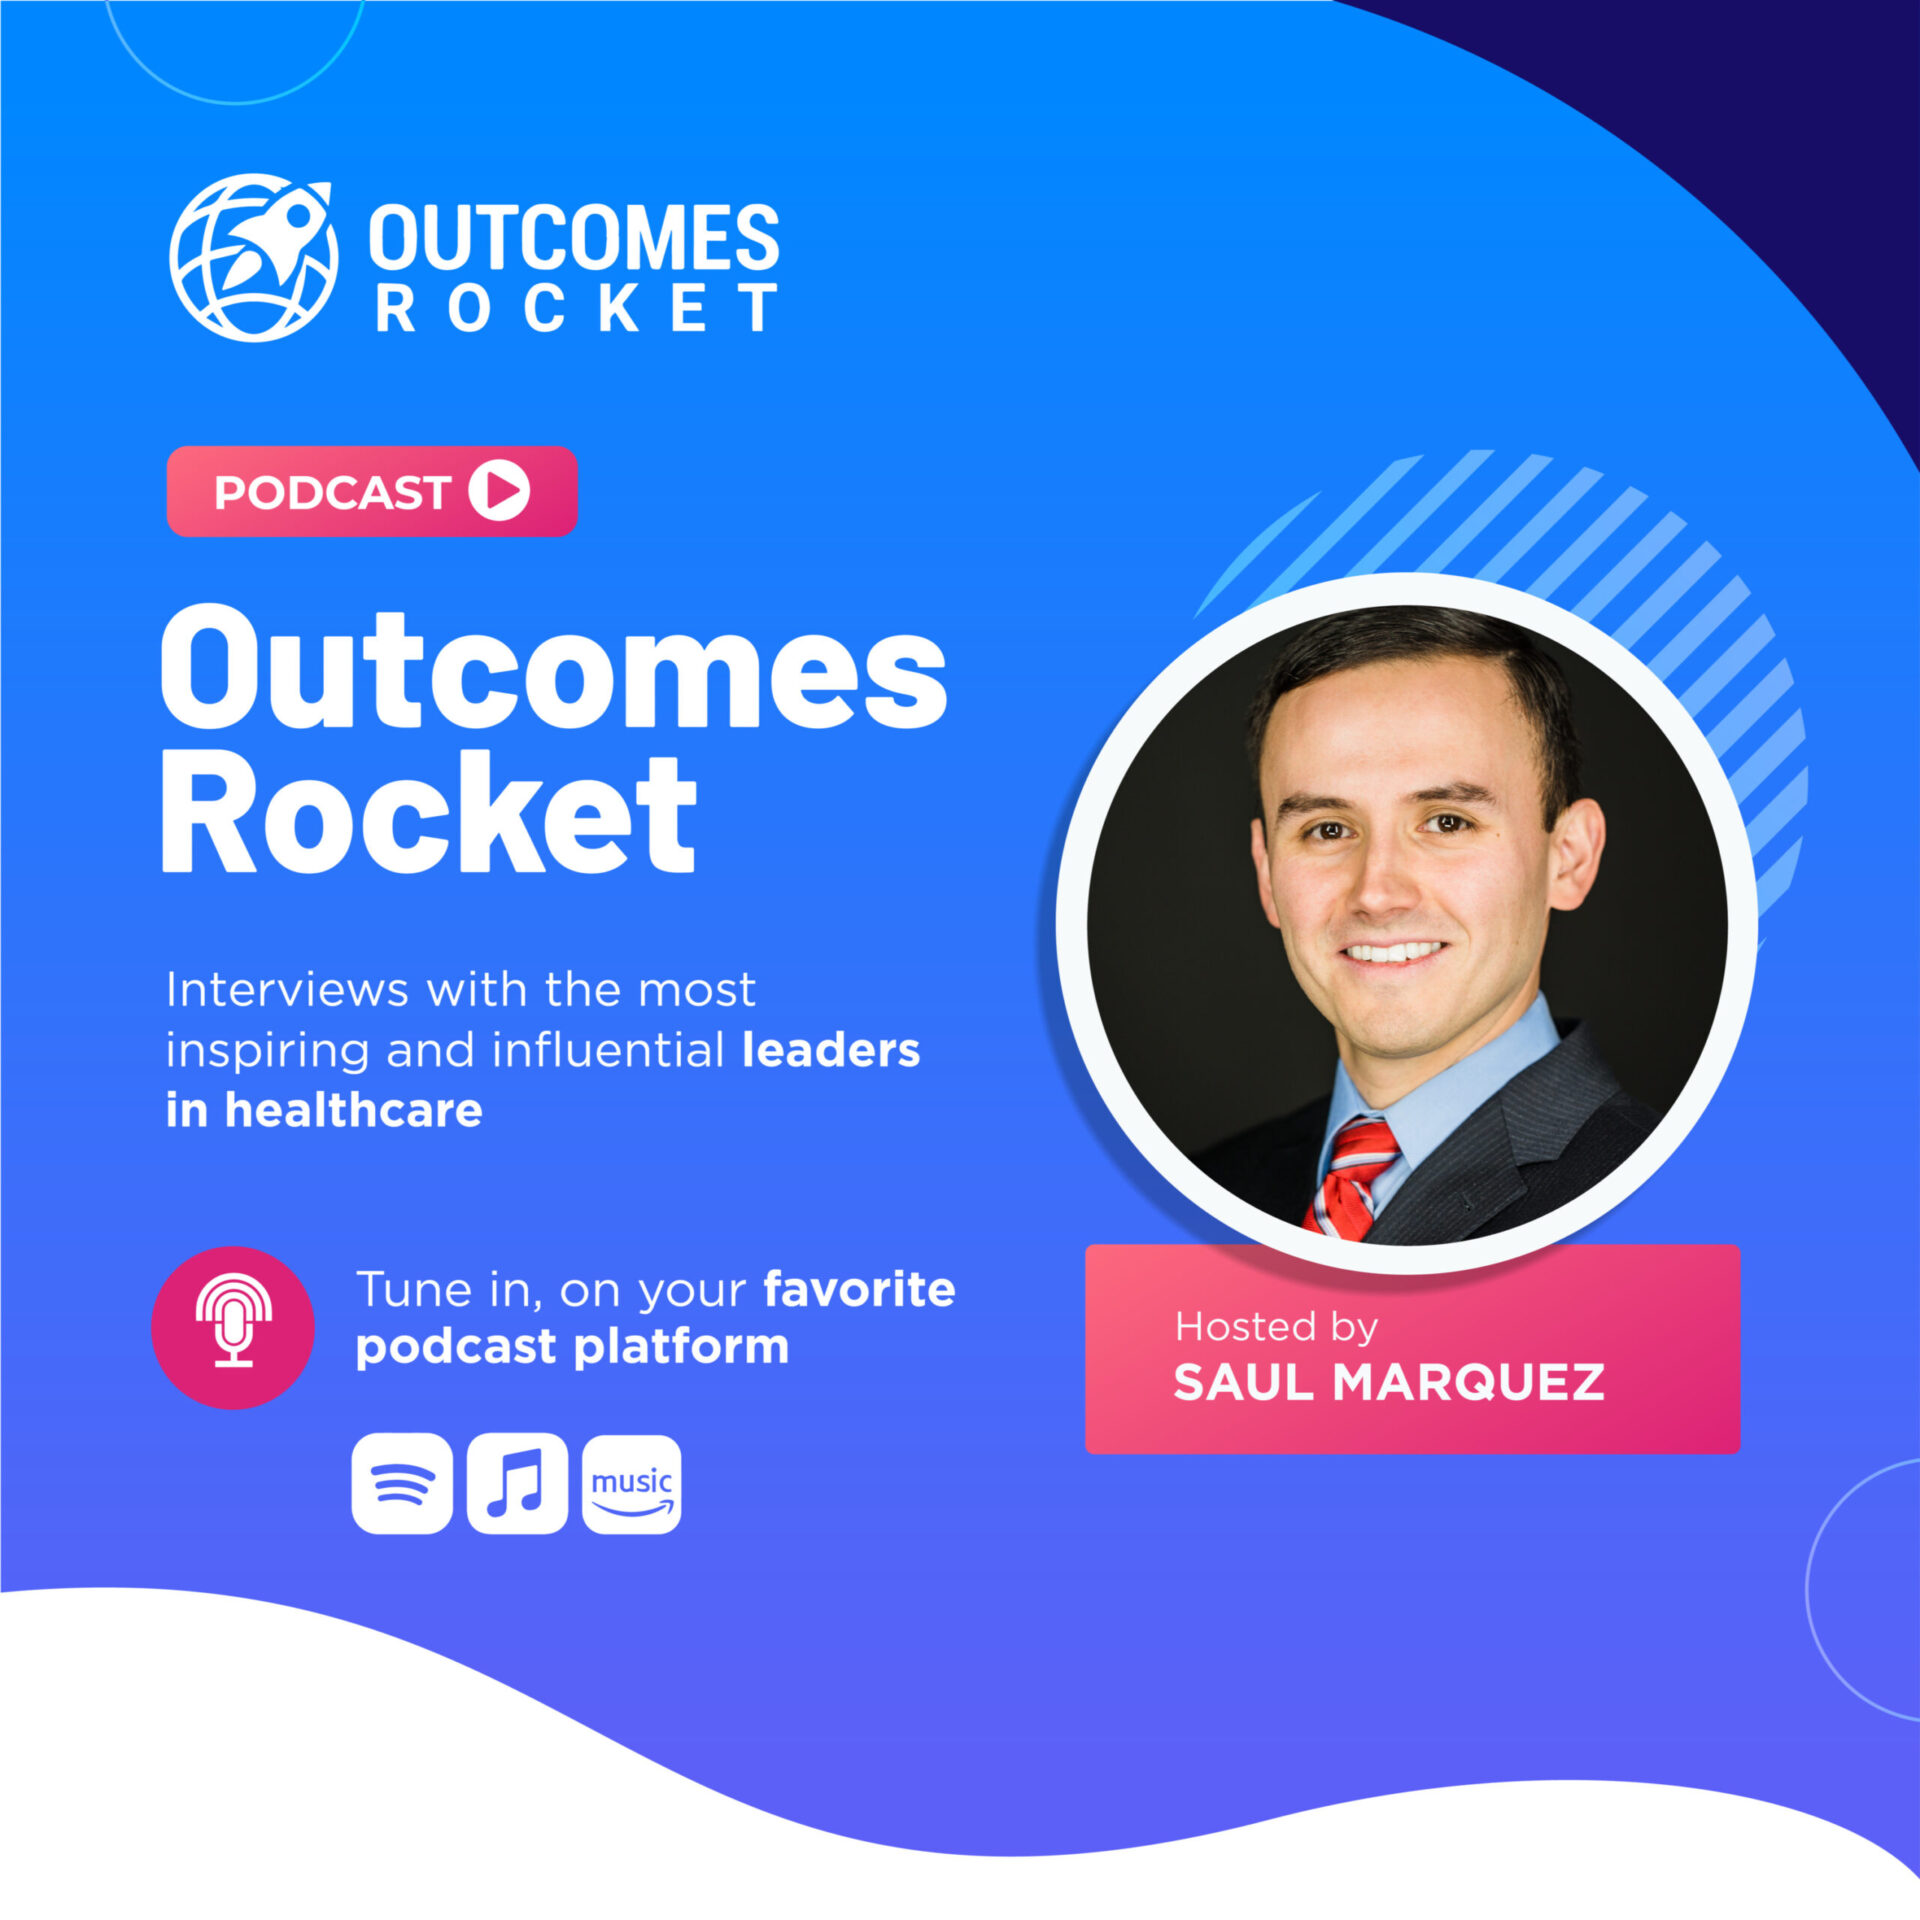 David guests on the Outcomes Rocket podcast